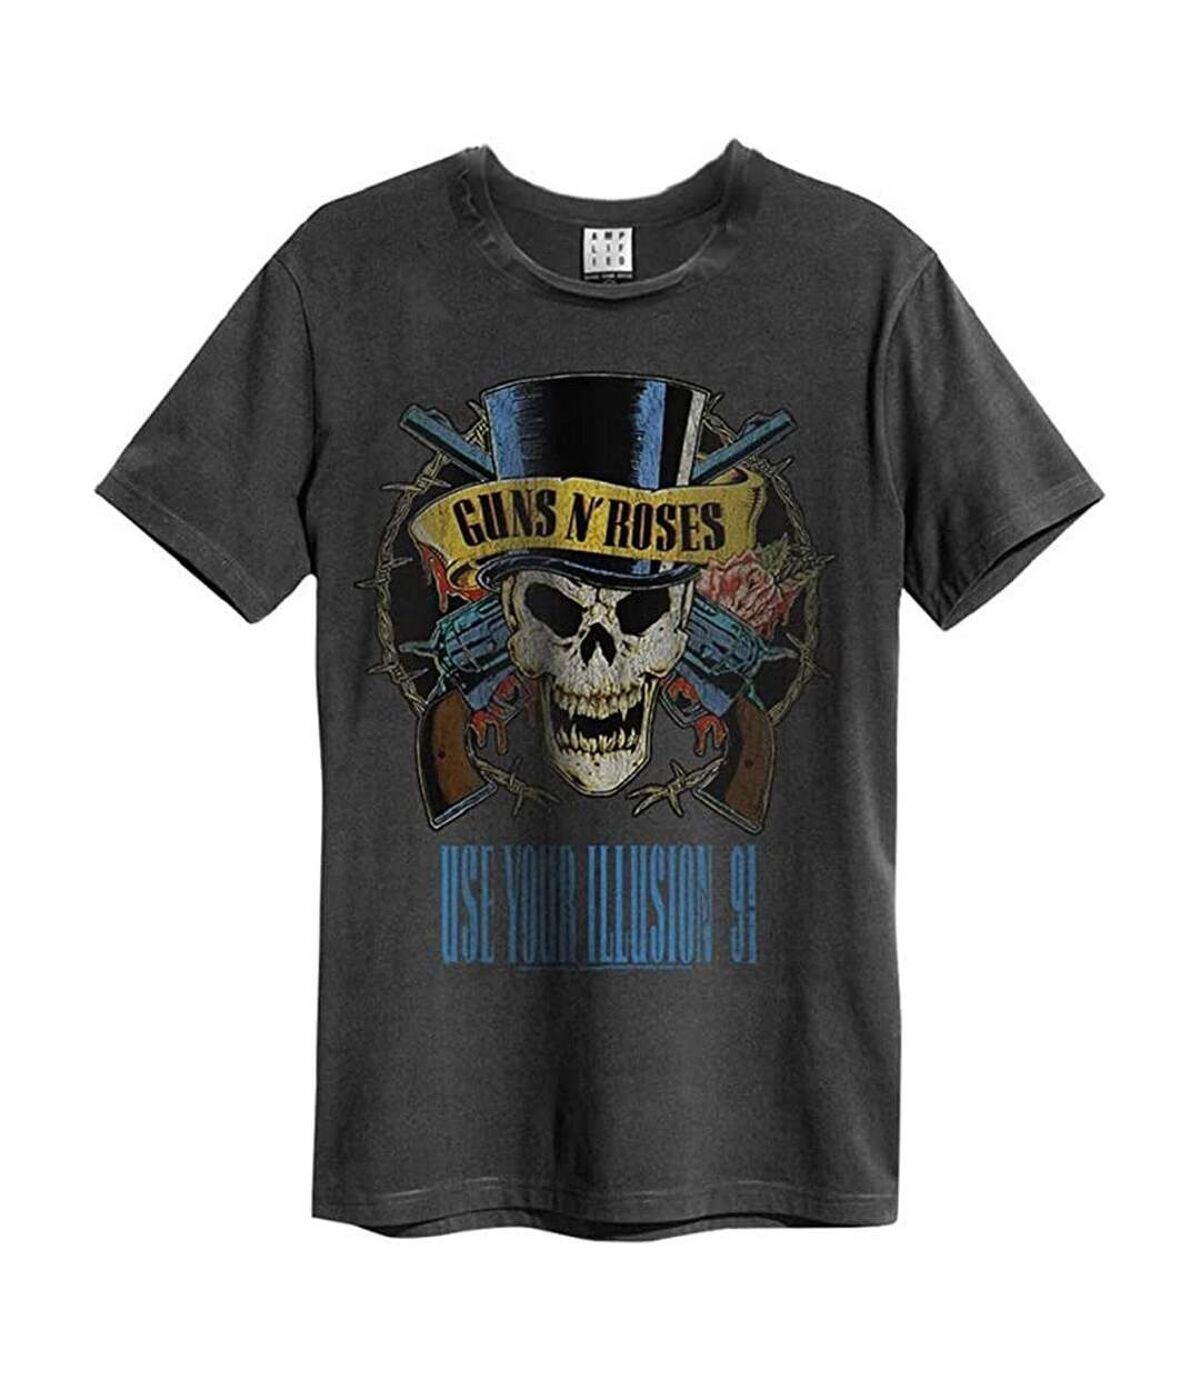 Guns N Roses - T-shirt USE YOUR ILLUSION - Adulte (Anthracite) - UTGD887